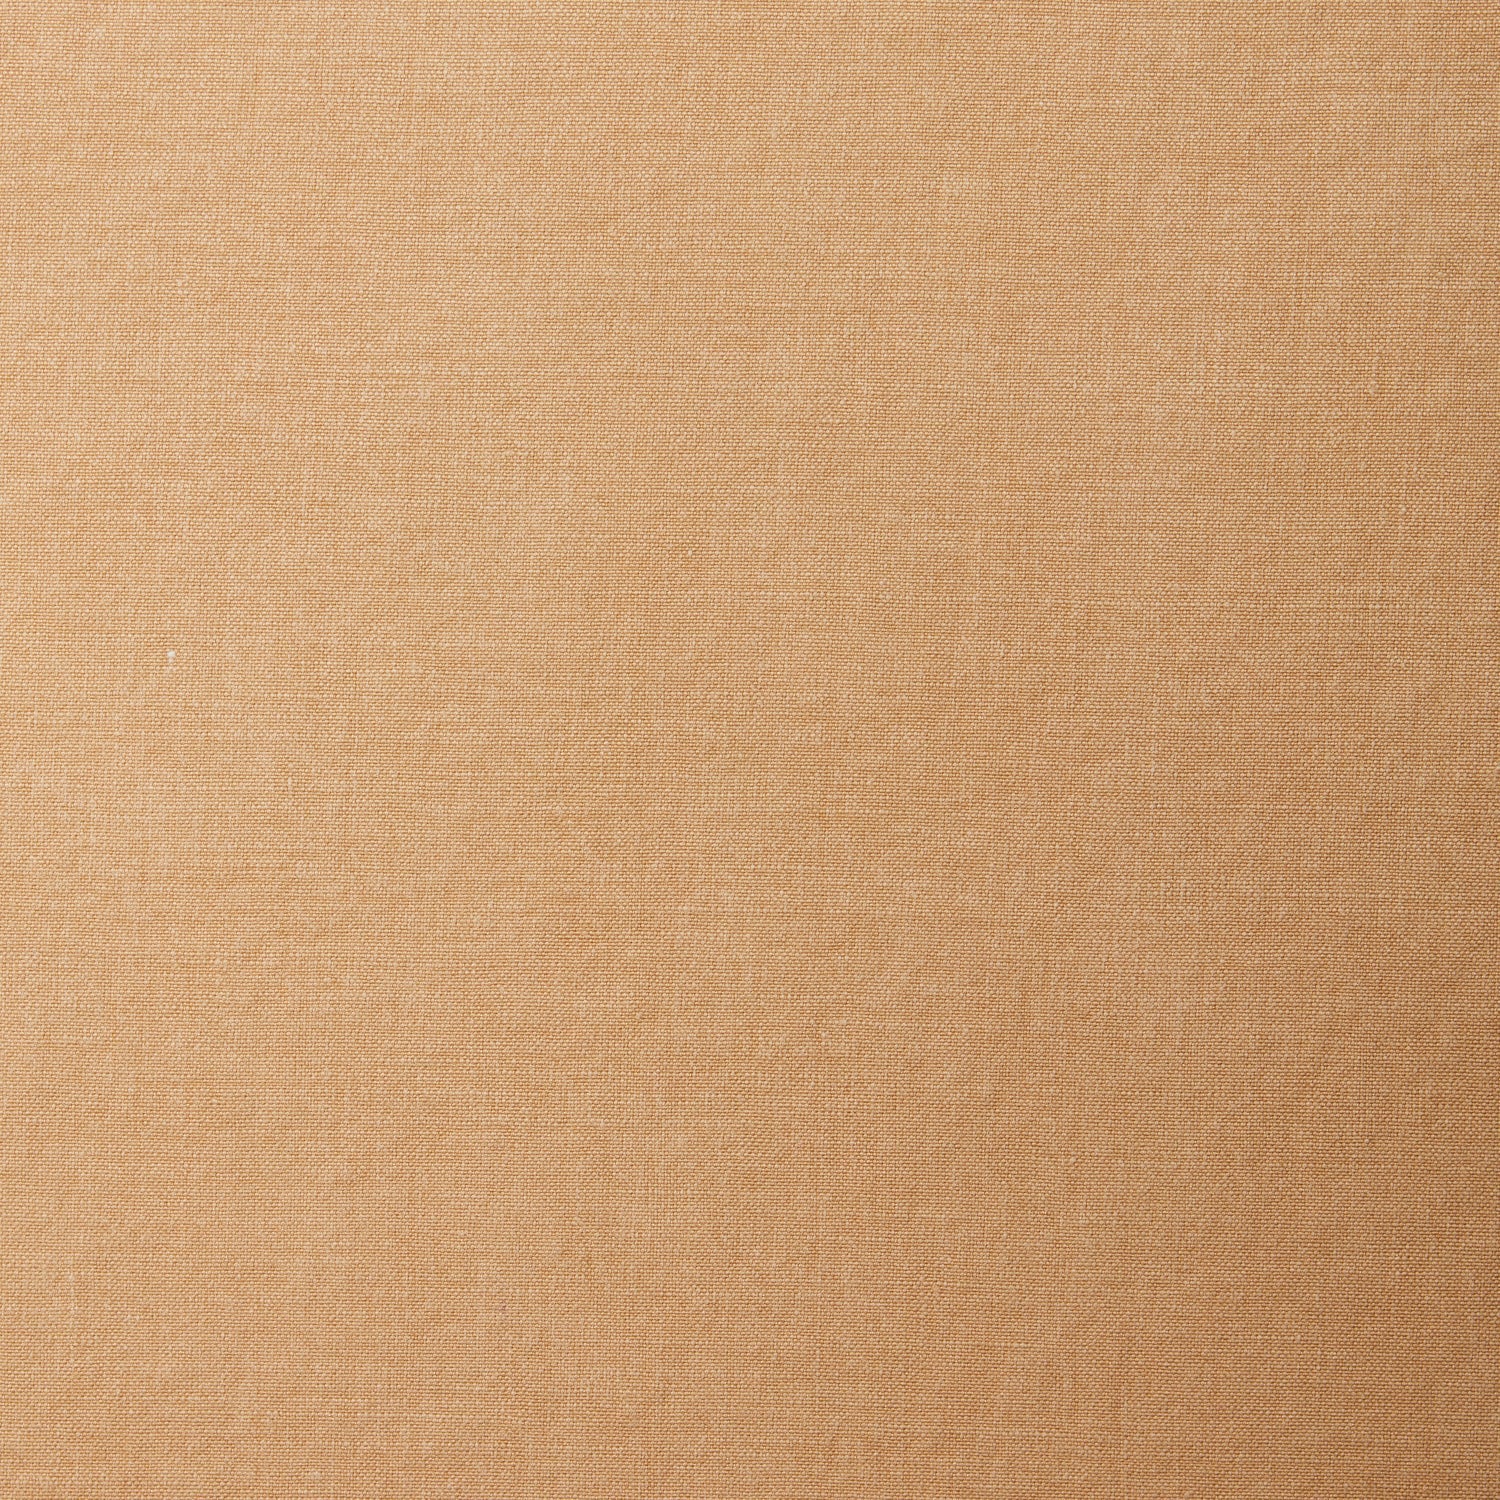 A swatch of linen fabric in a solid tan color.